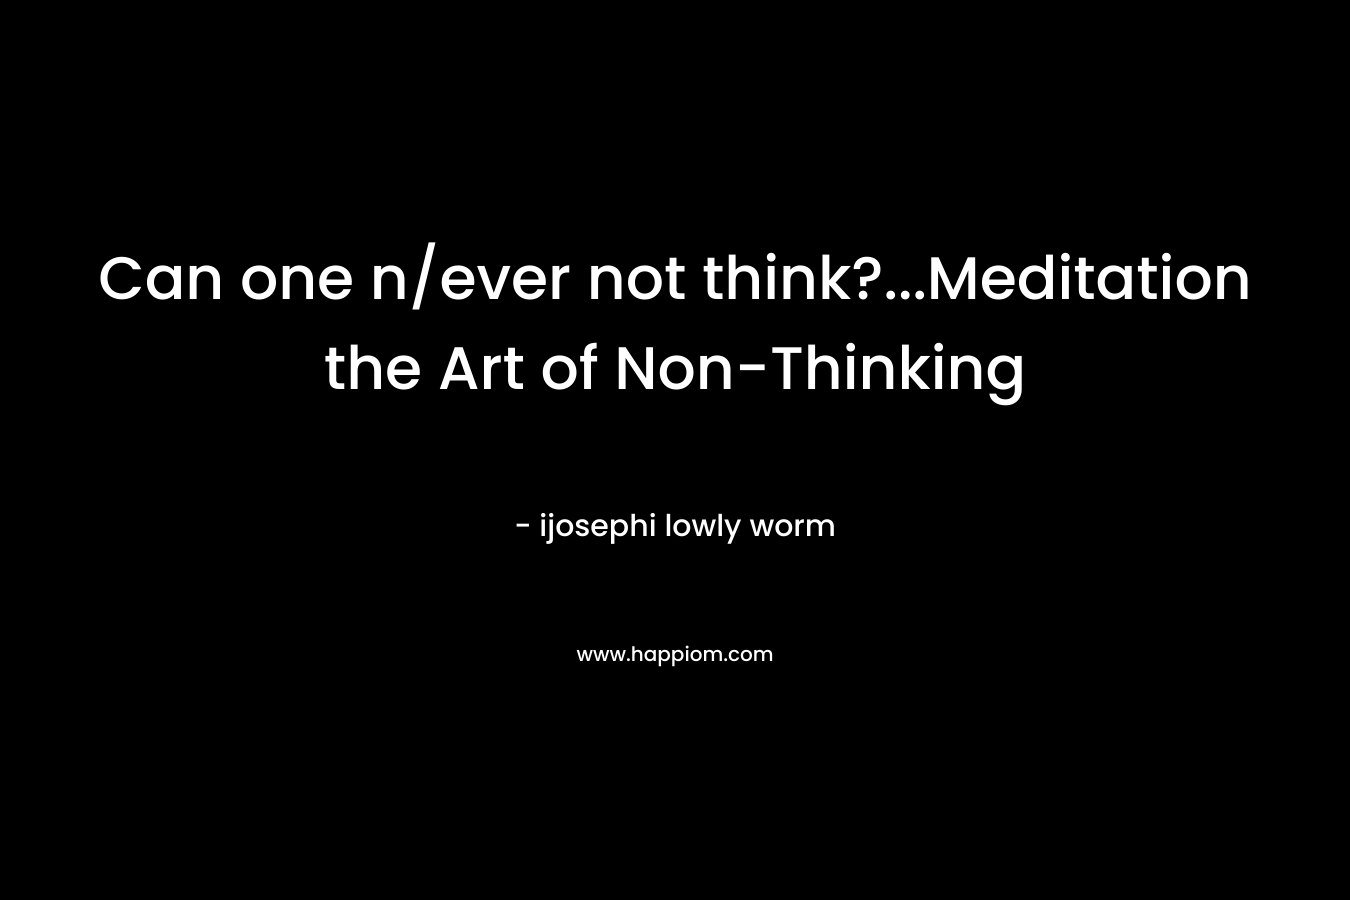 Can one n/ever not think?...Meditation the Art of Non-Thinking